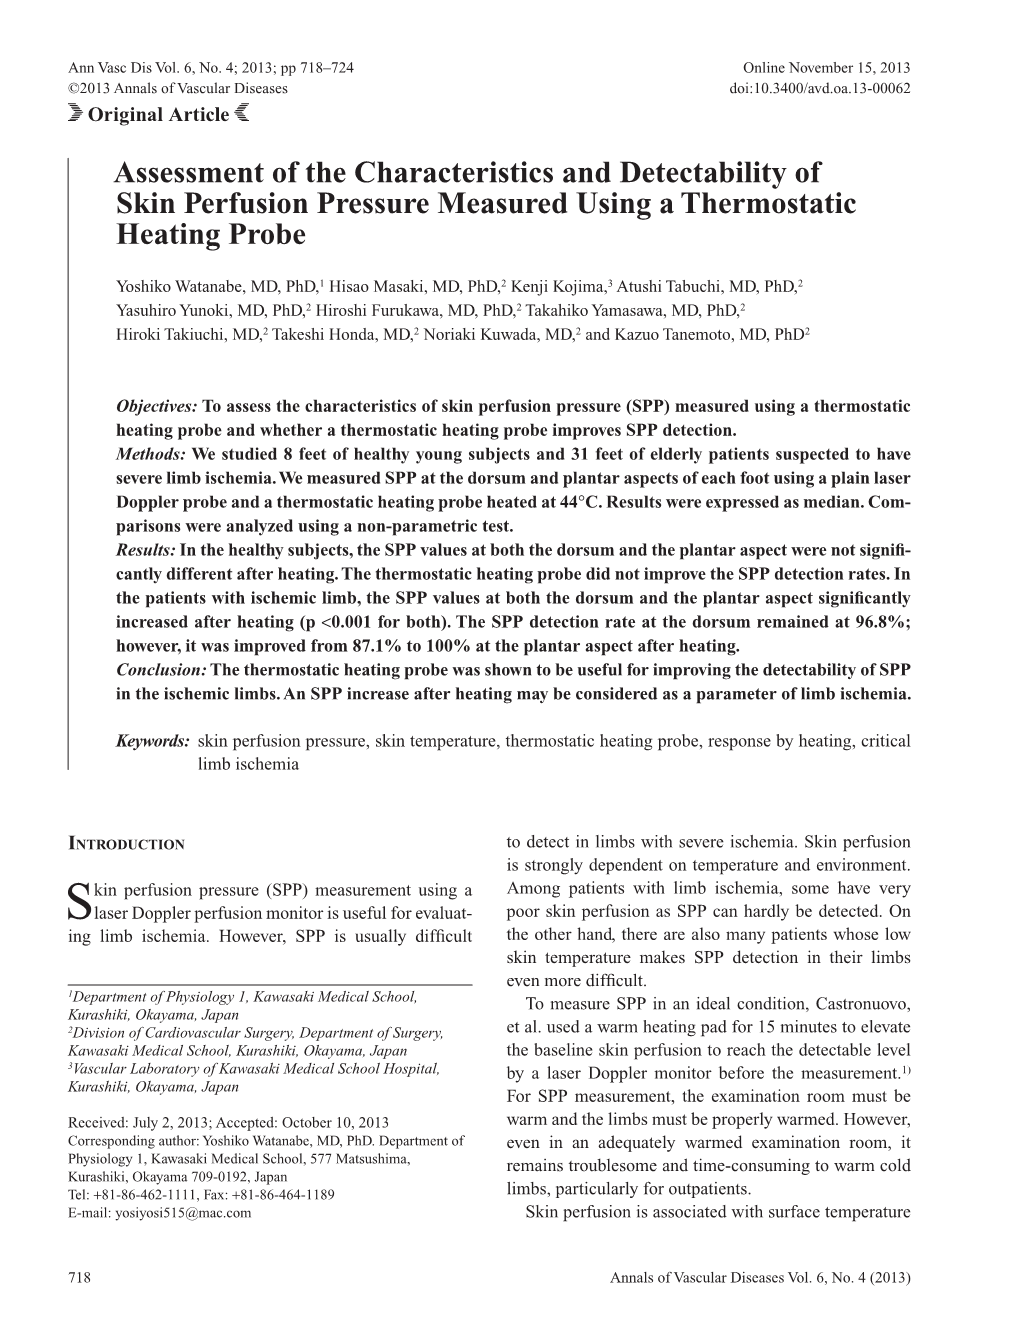 Assessment of the Characteristics and Detectability of Skin Perfusion Pressure Measured Using a Thermostatic Heating Probe